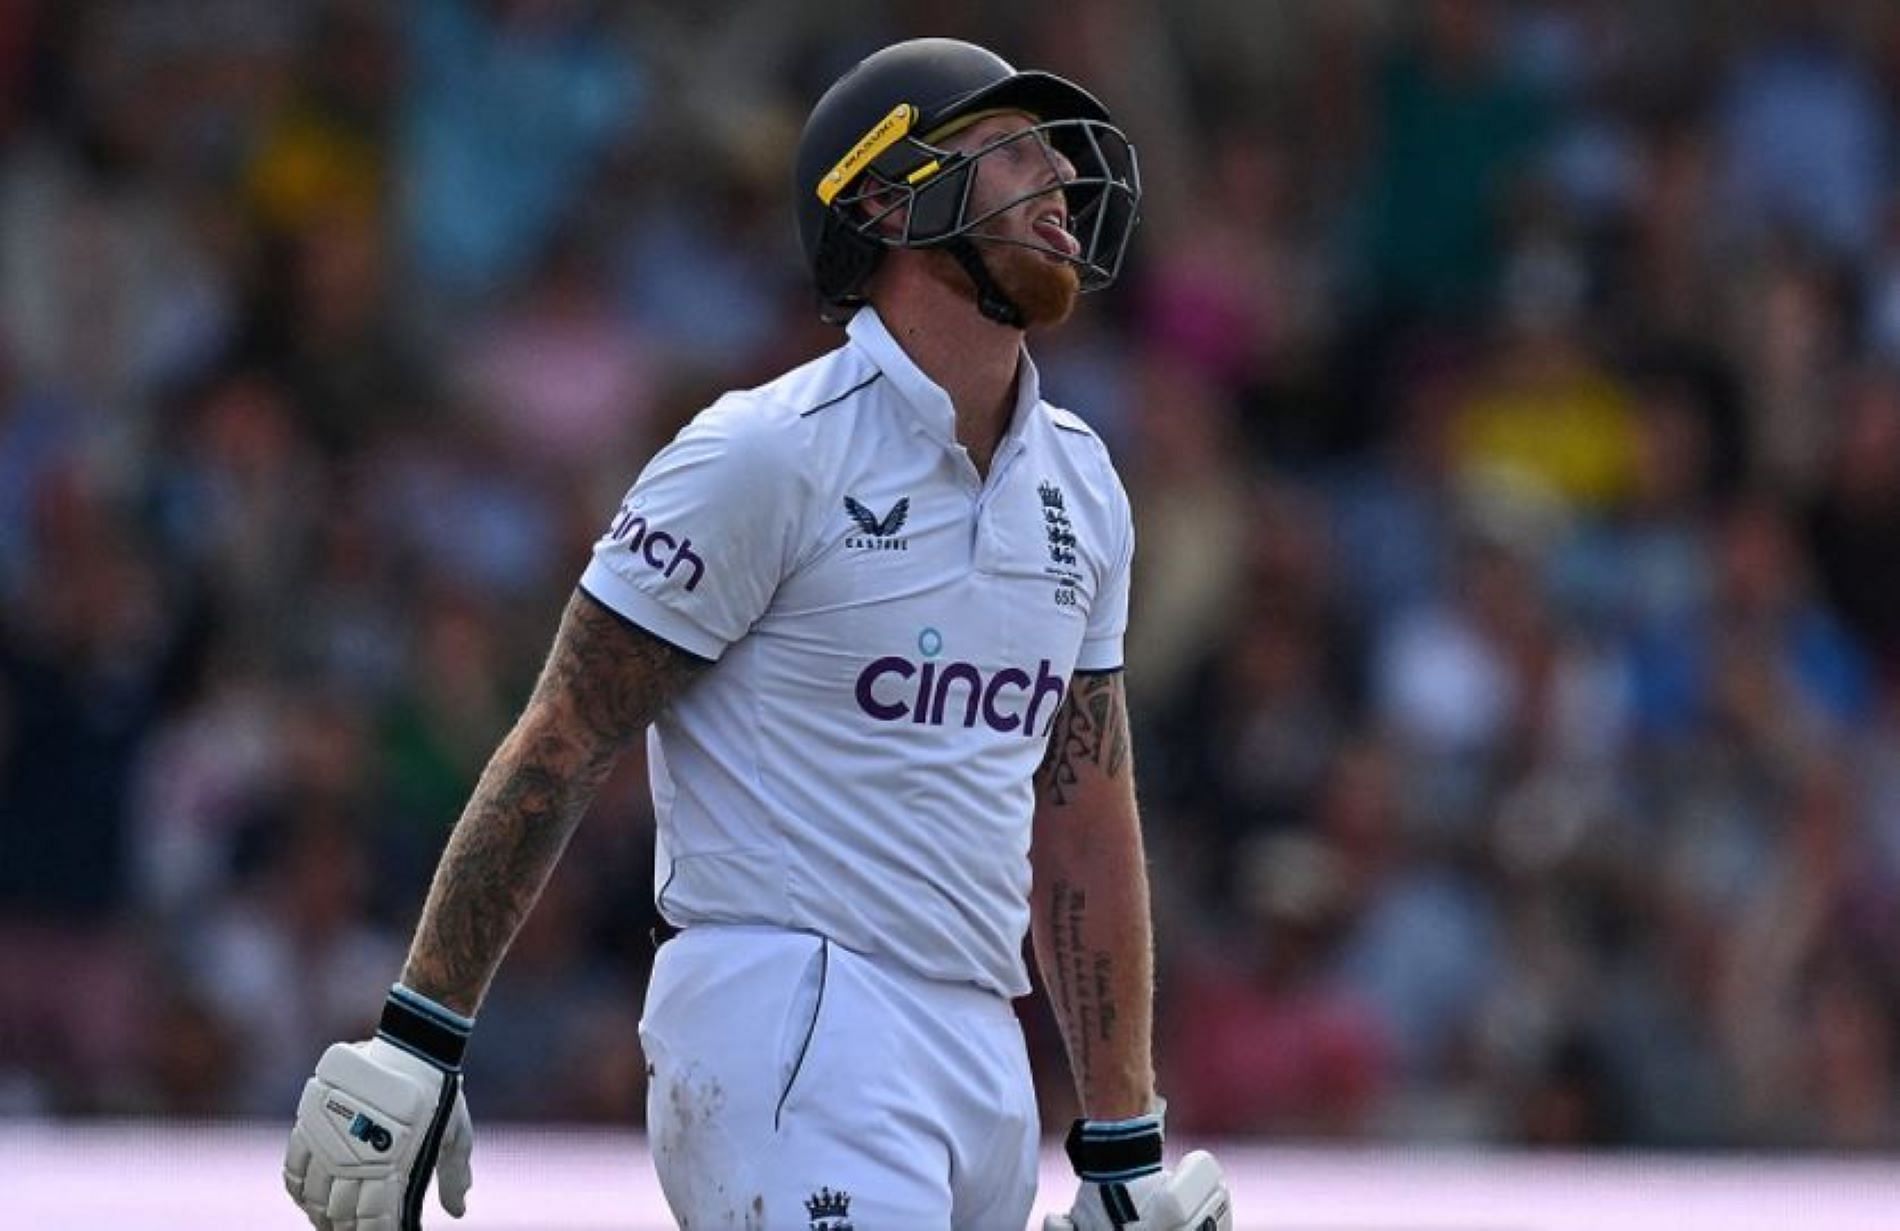 Ben Stokes produced another stunning knock at Headingley